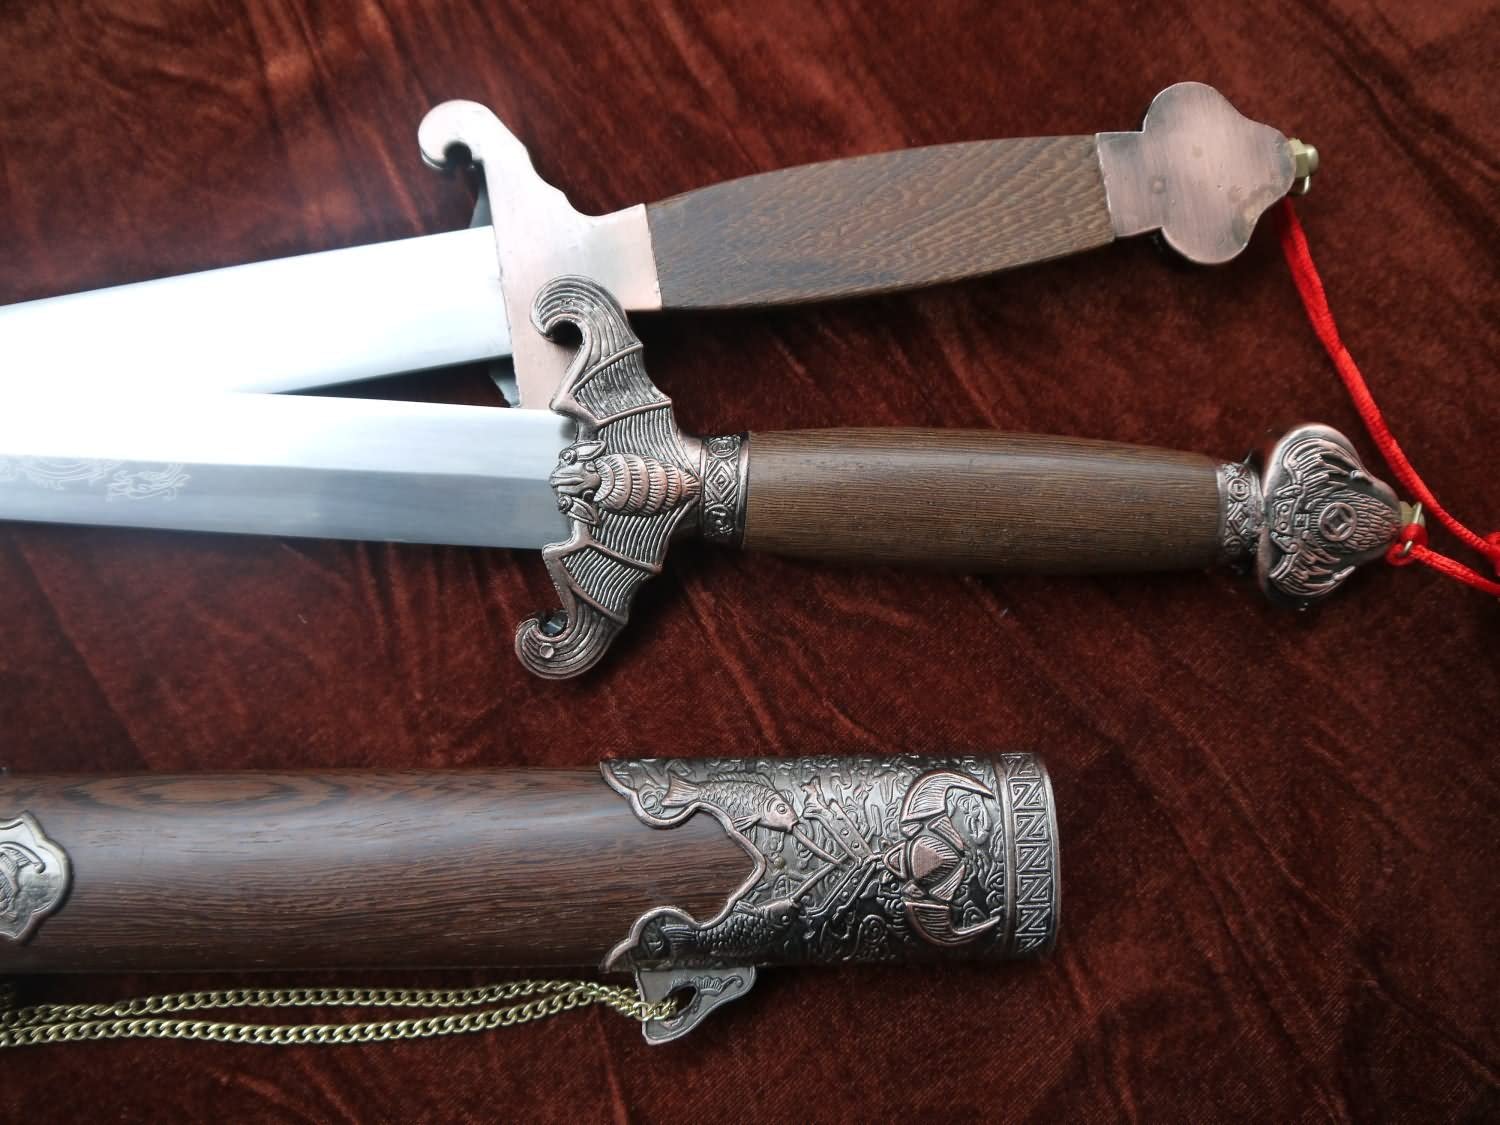 China's Double-Sword/Rosewood Scabbard/Stainless Steel/Bat Tai Chi Sword